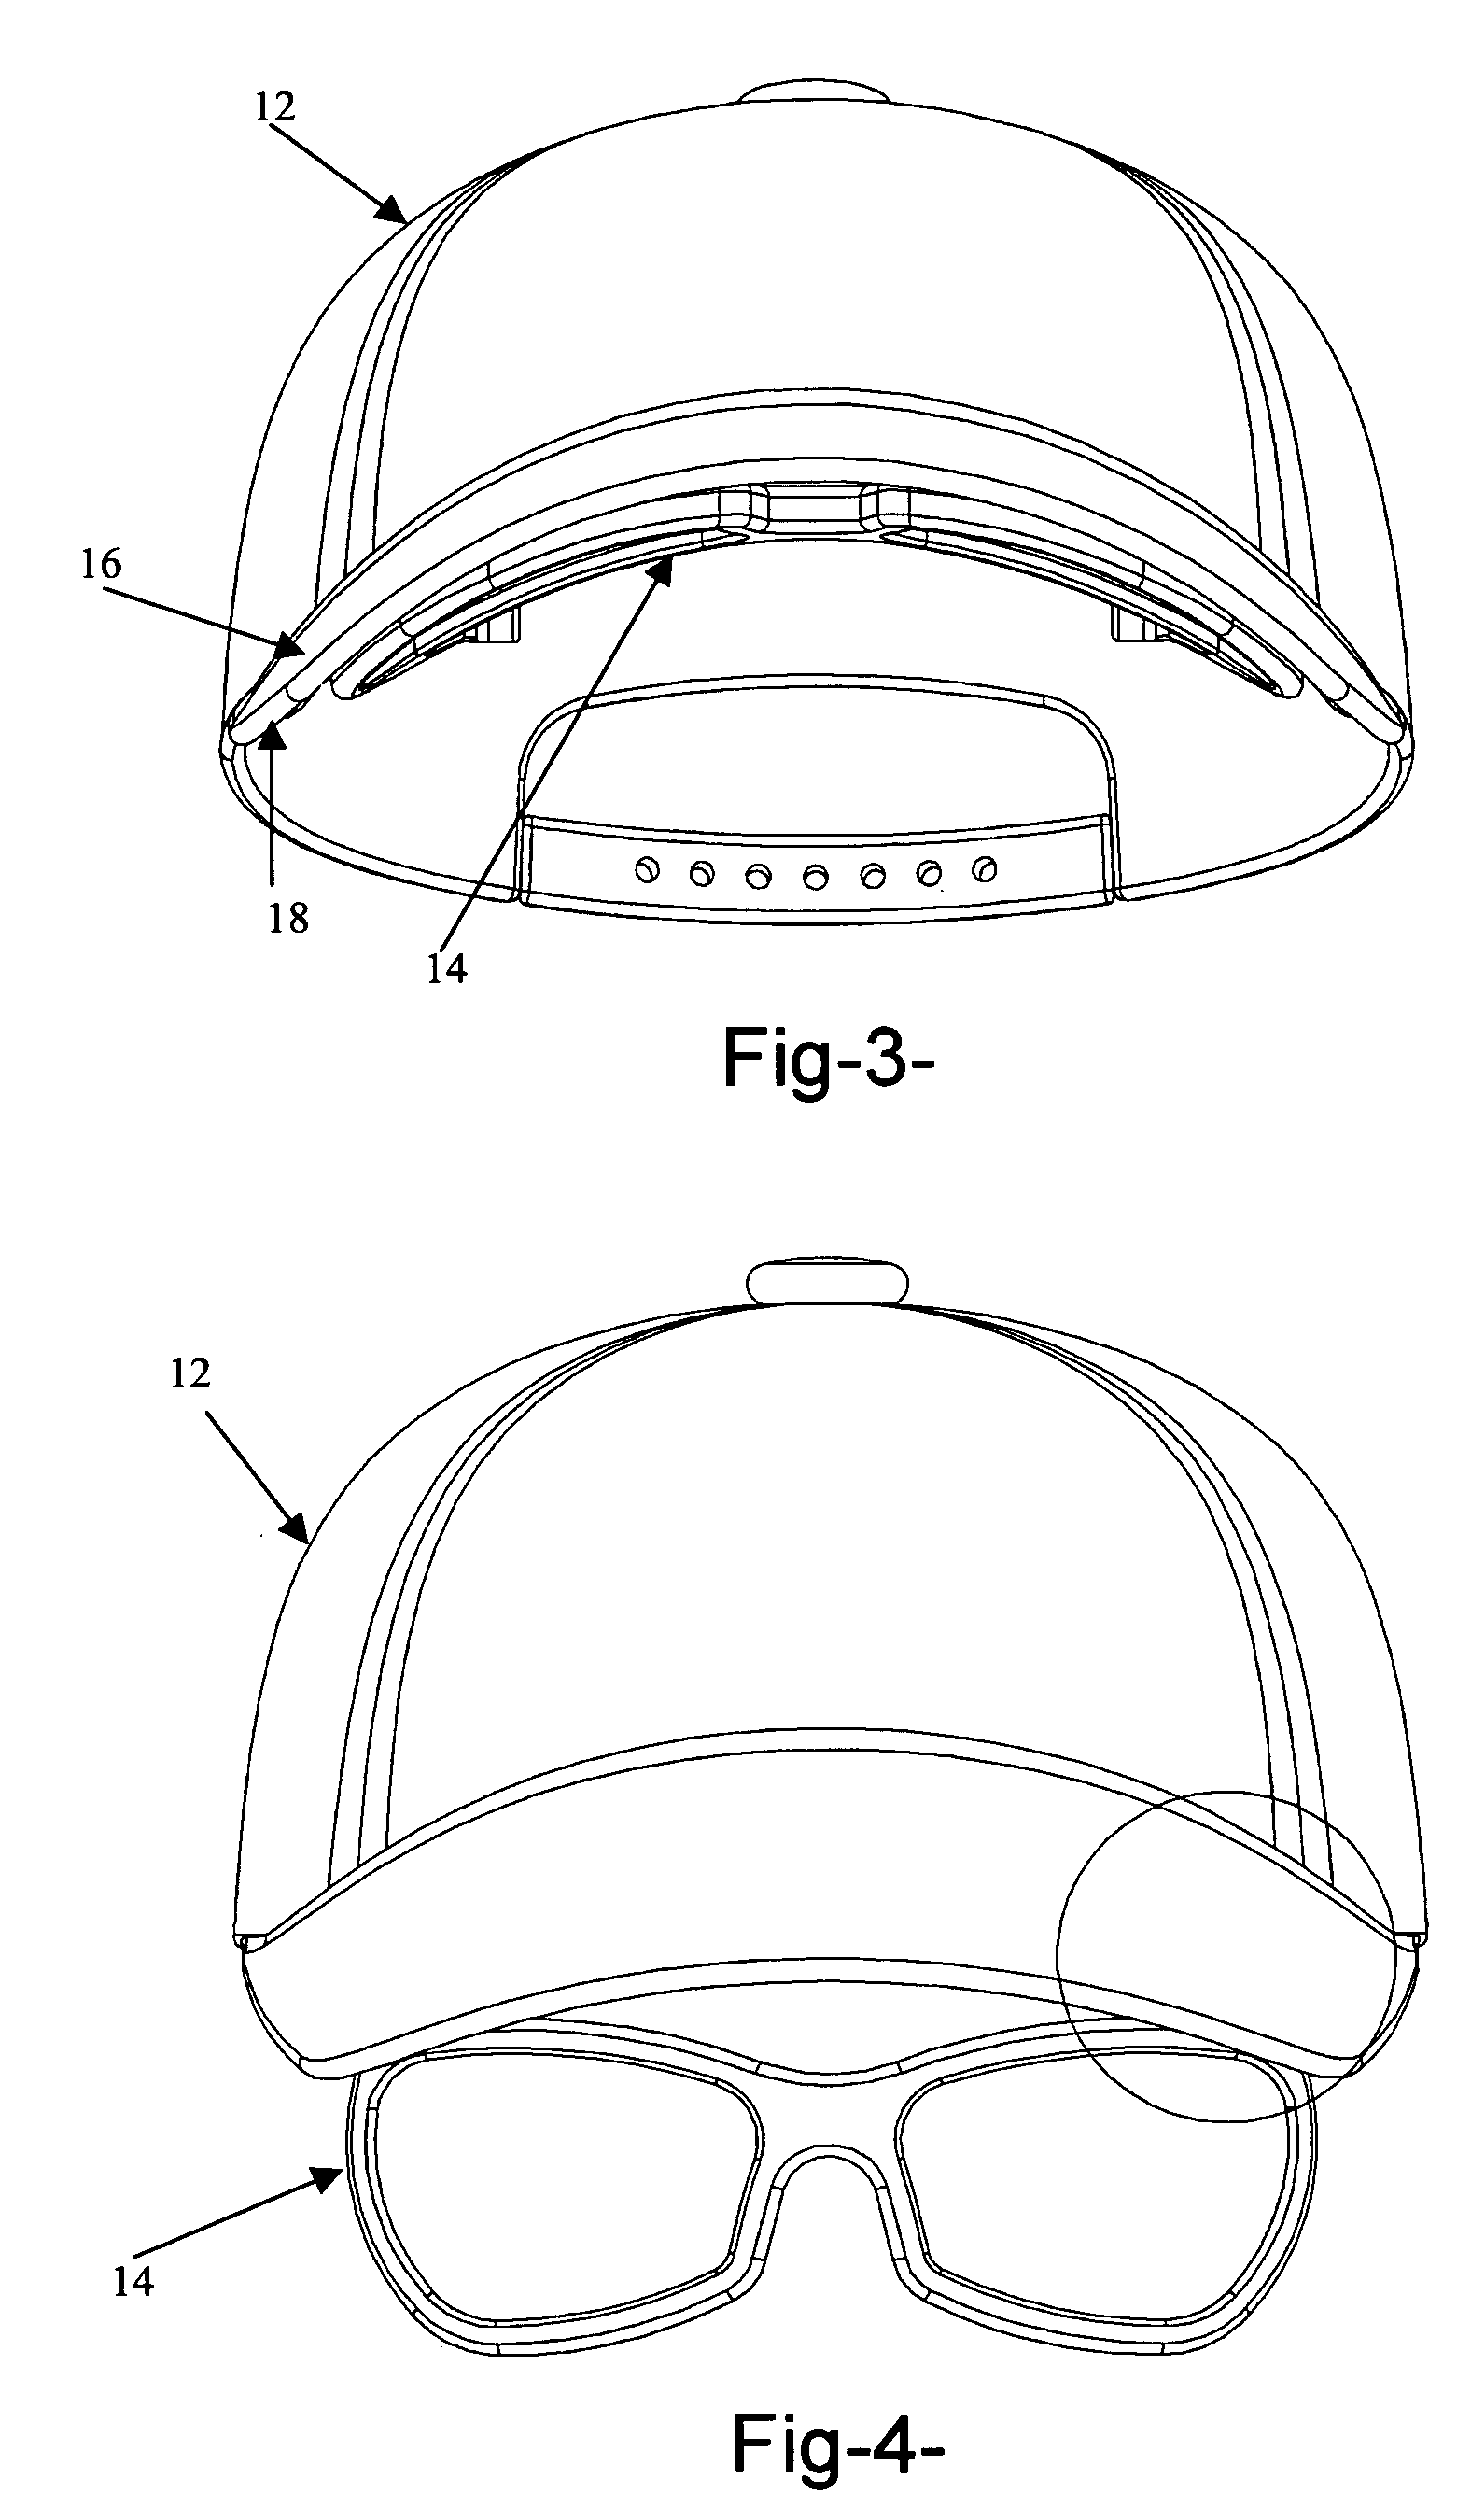 Eyewear assembly for attachment to headwear